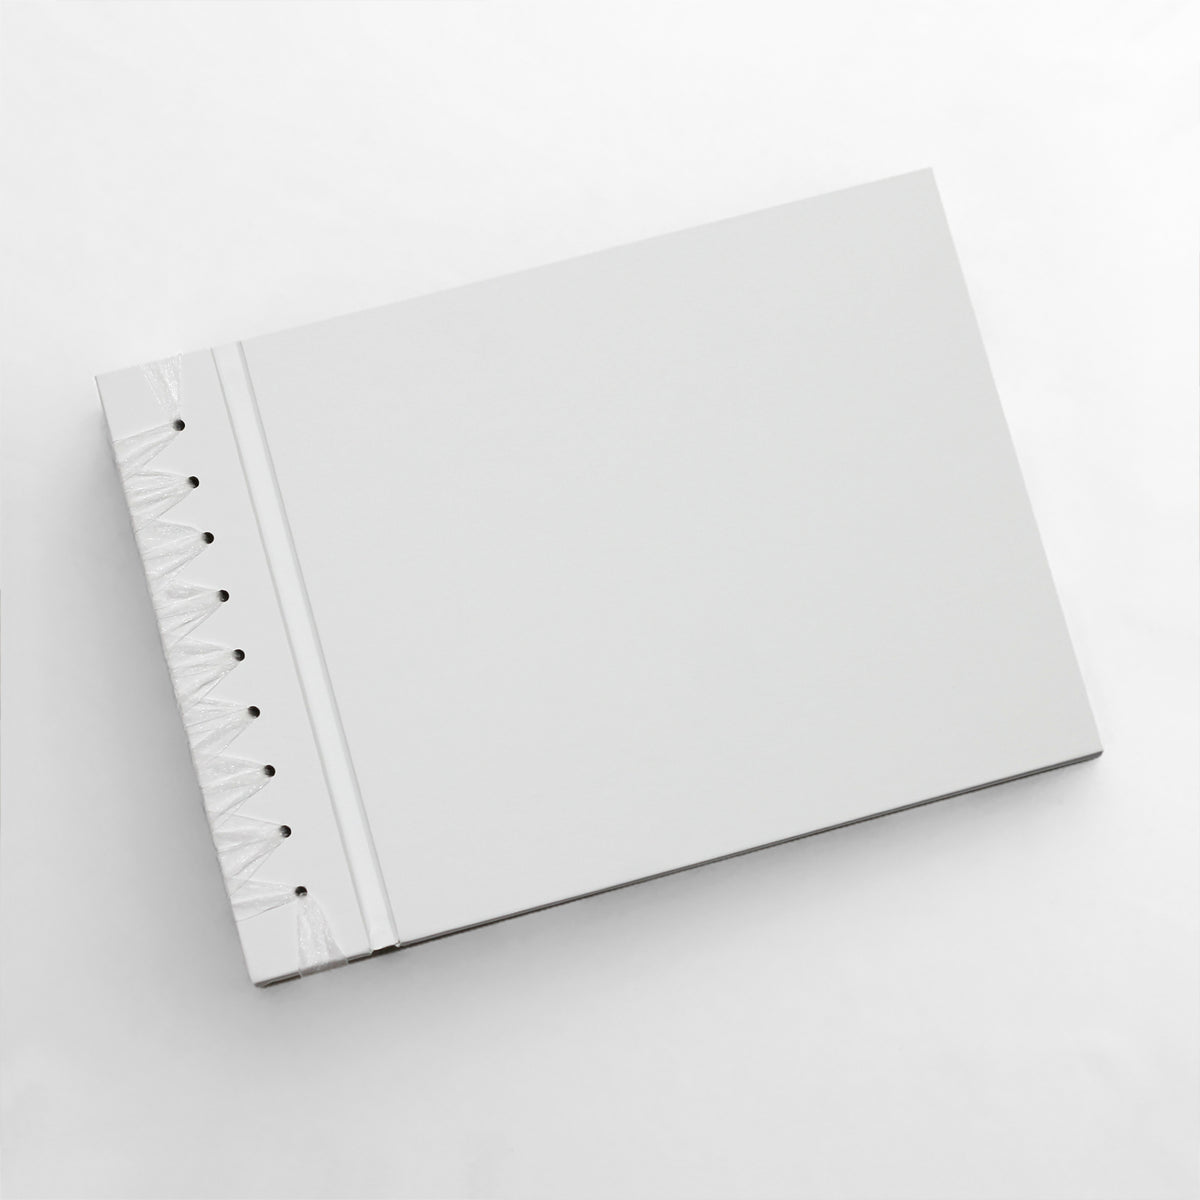 Large 10 x 15 Paper Page Album | Cover: White Vegan Leather | Available Personalized